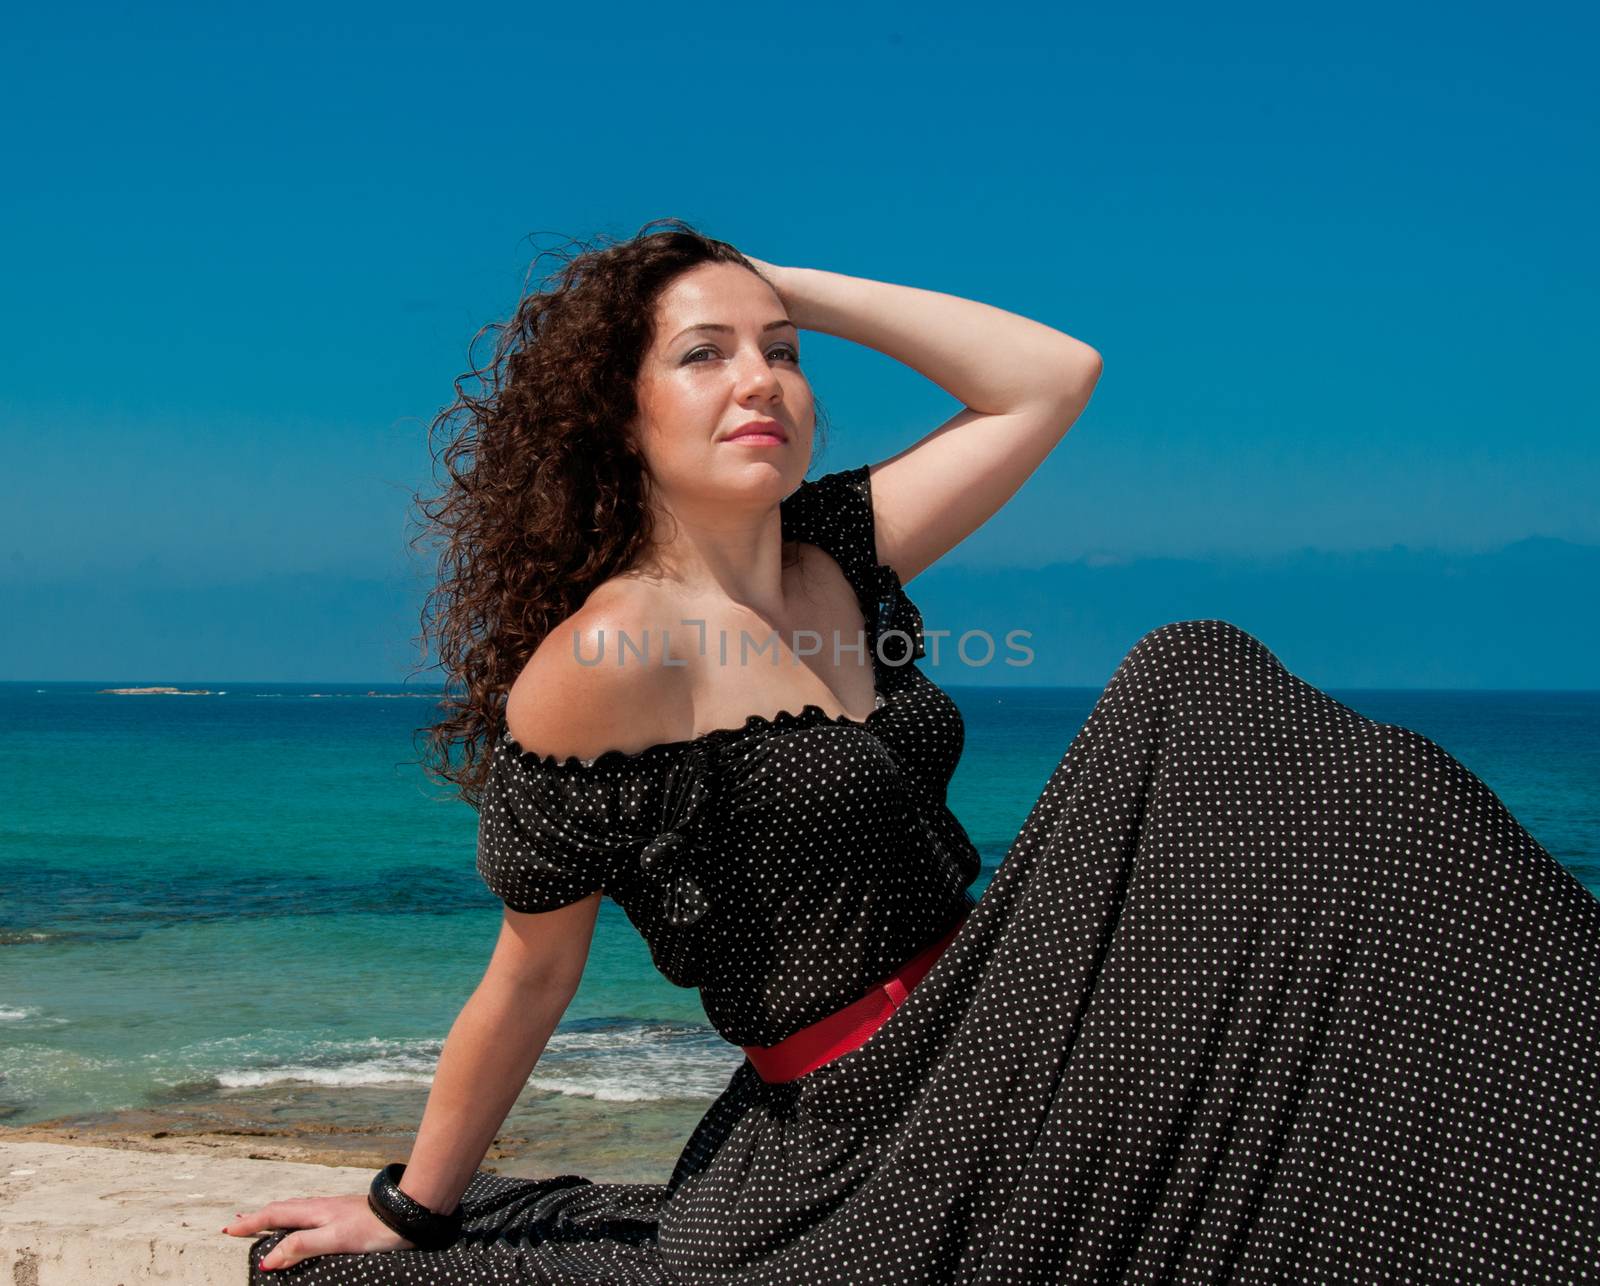 The girl in a black dress sitting on the beach by ben44